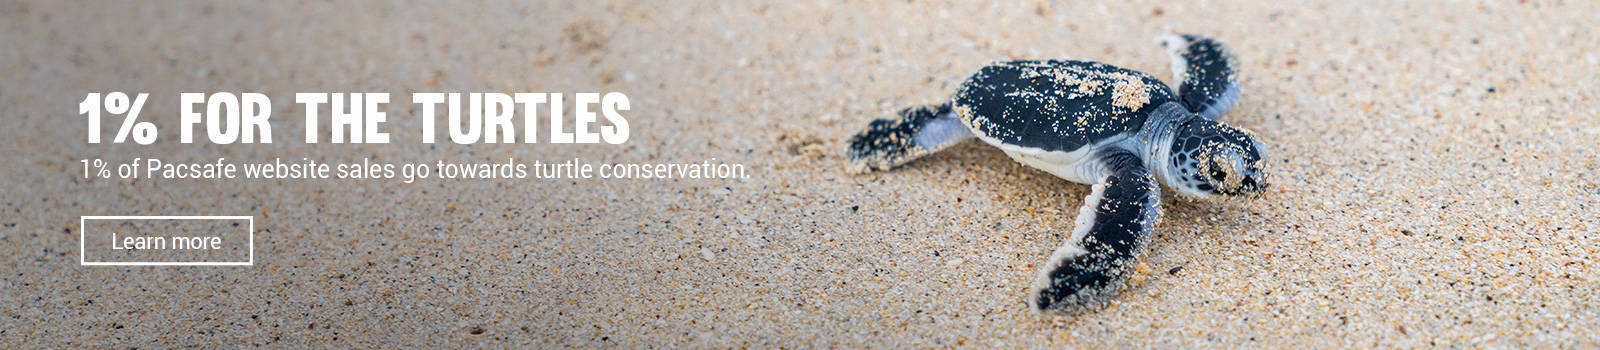 1% for the turtles - 1% of Pacsafe website sales go towards turtle conservation